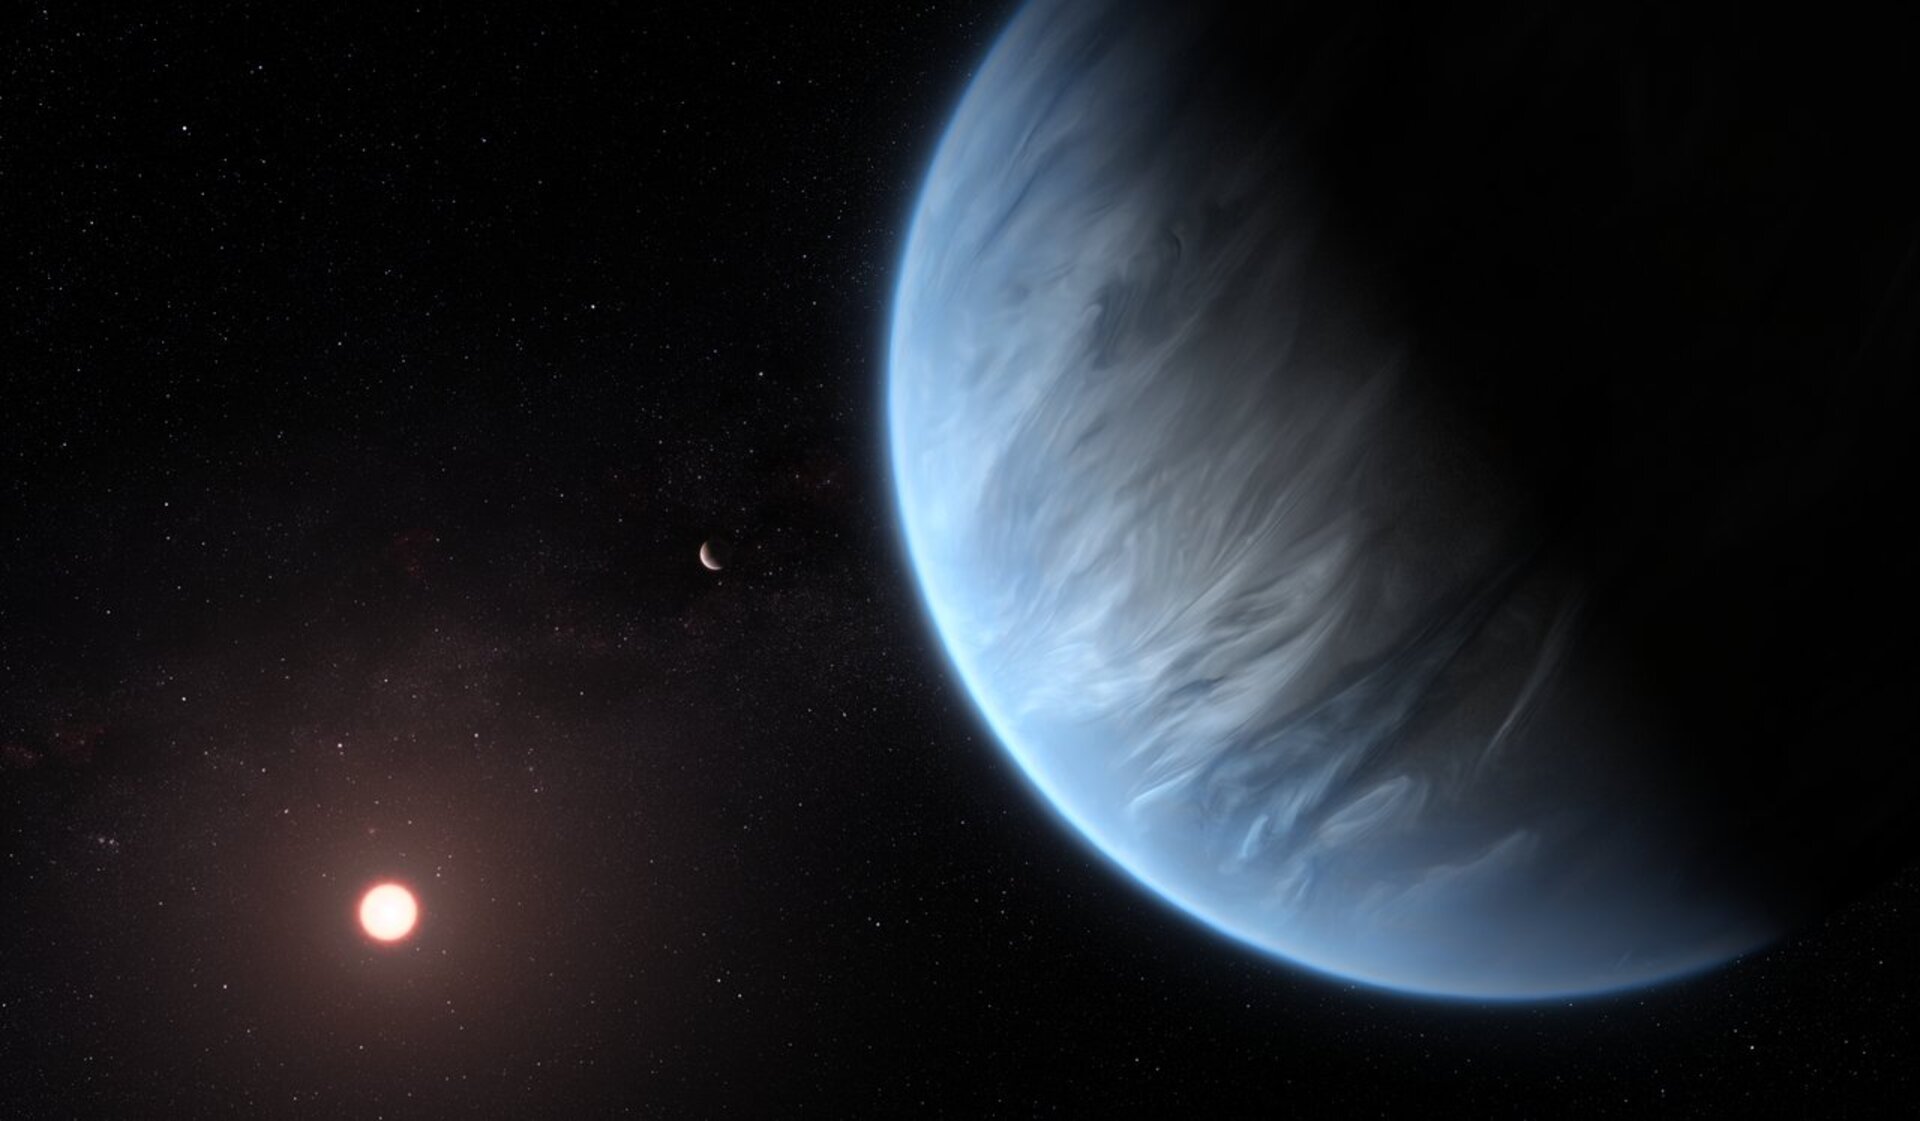 Hubble finds water vapor on habitable-zone exoplanet for the first time